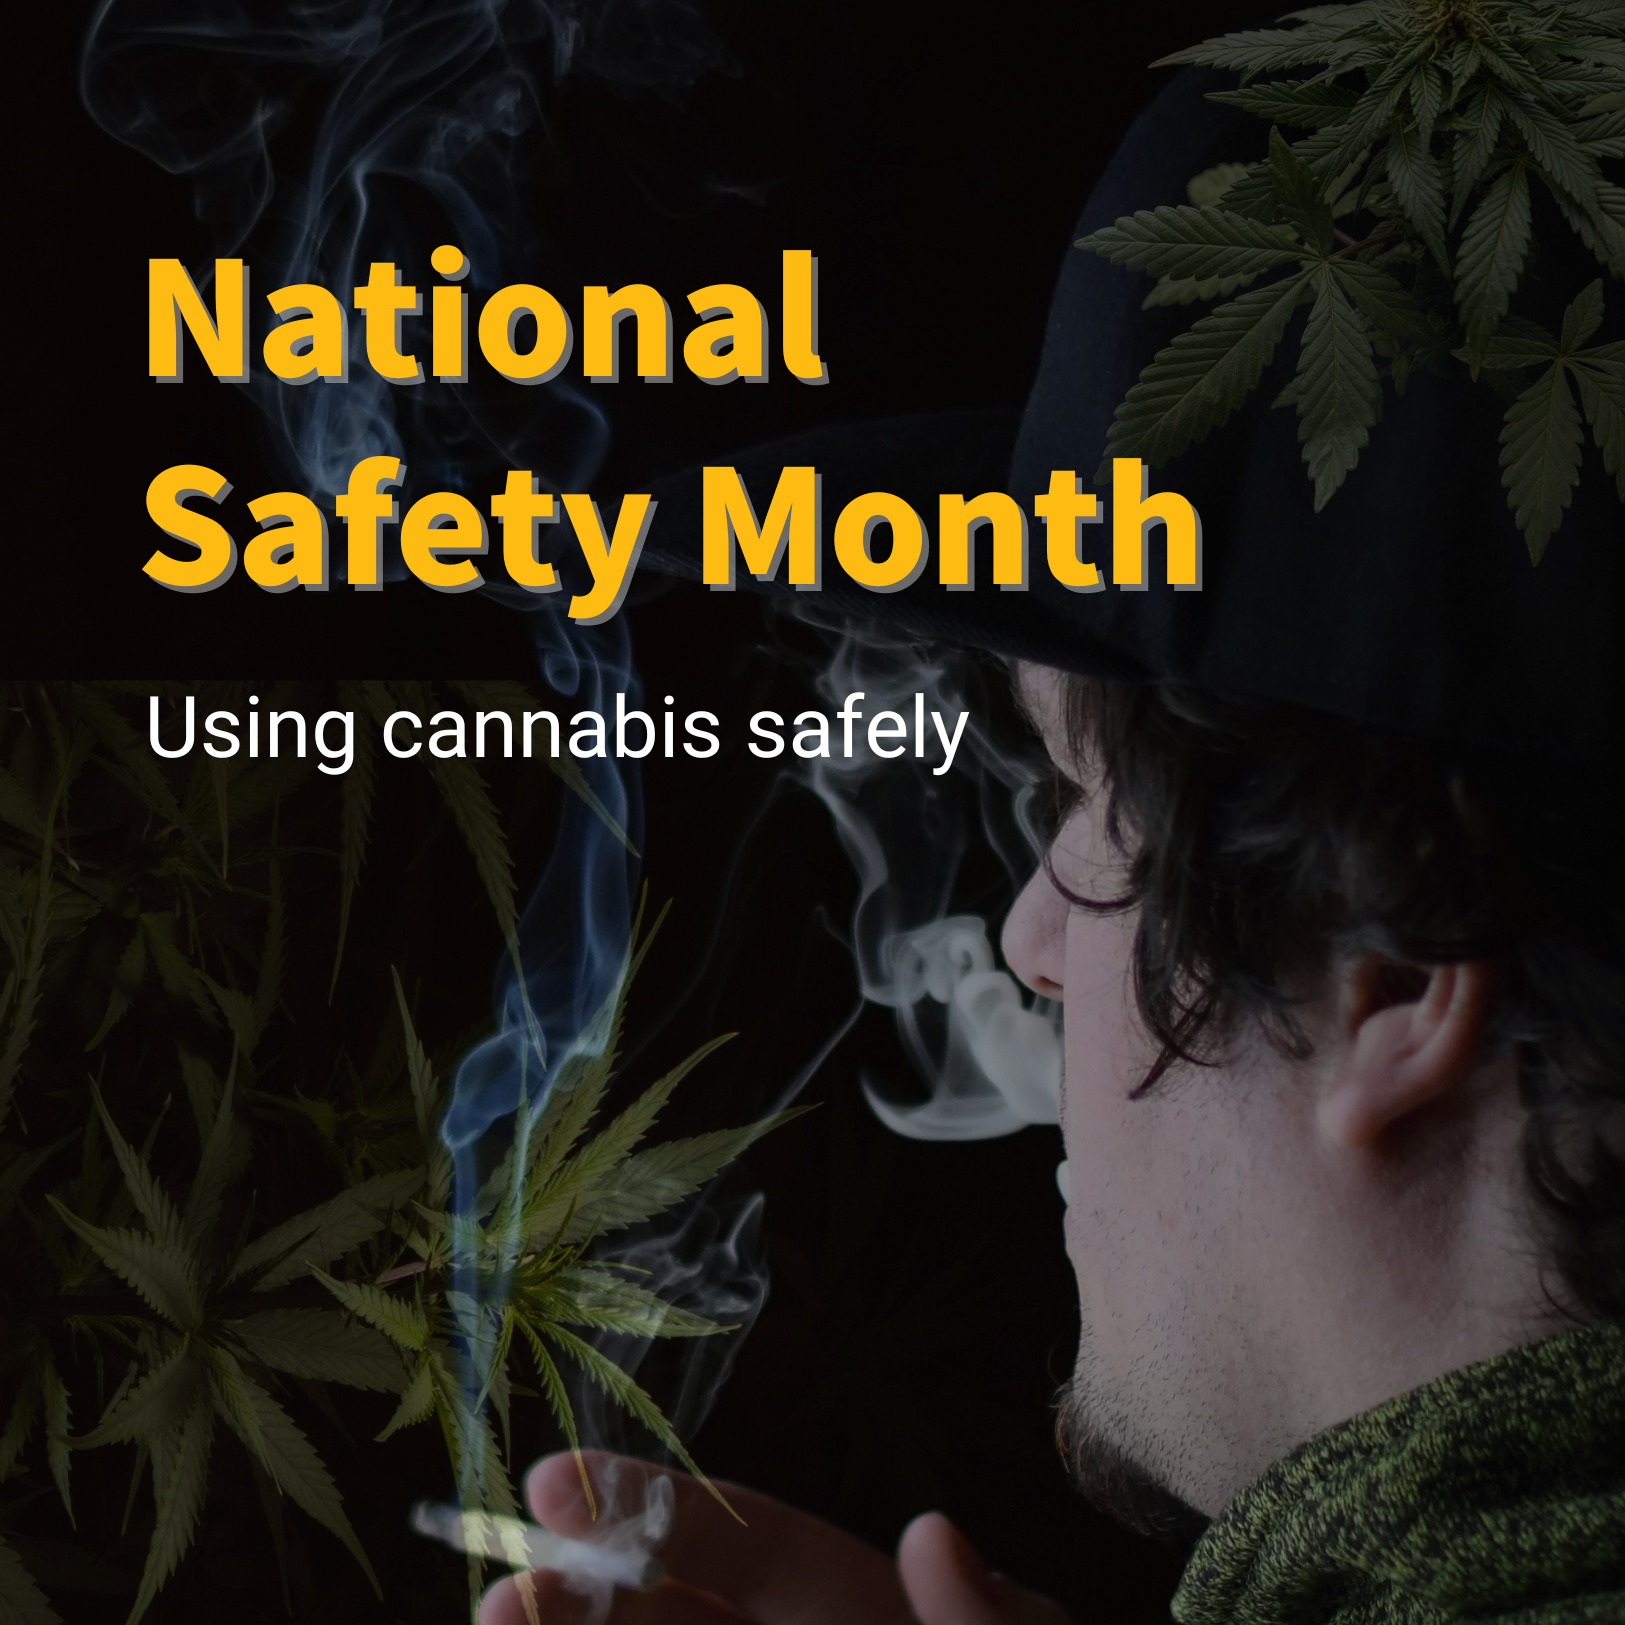 National Safety Month -- Using cannabis safely